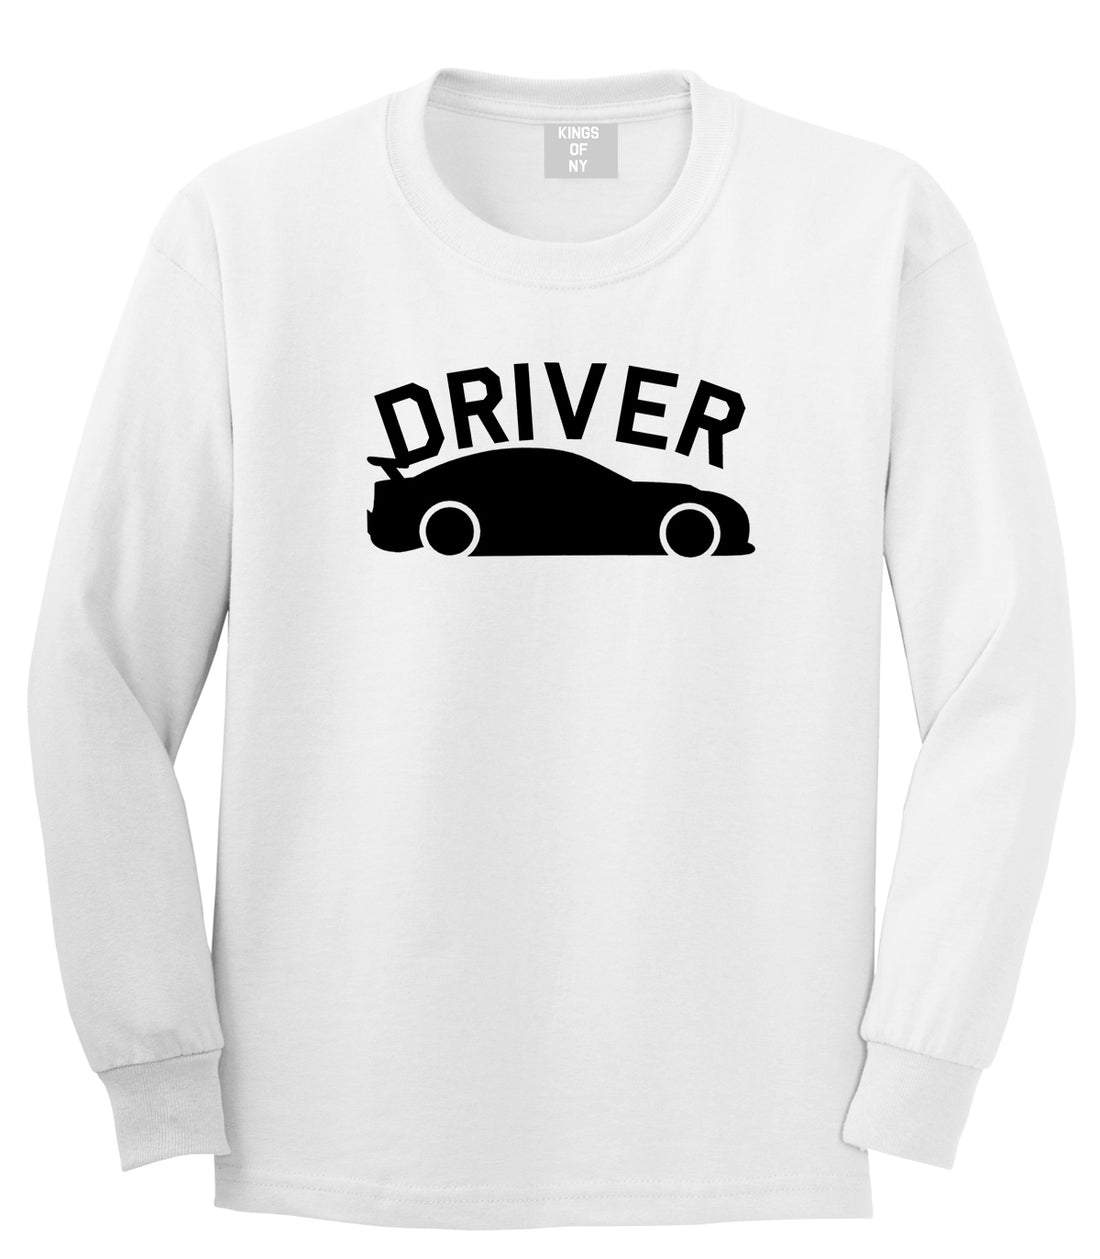 Race Car Driver Drive Mens White Long Sleeve T-Shirt by Kings Of NY